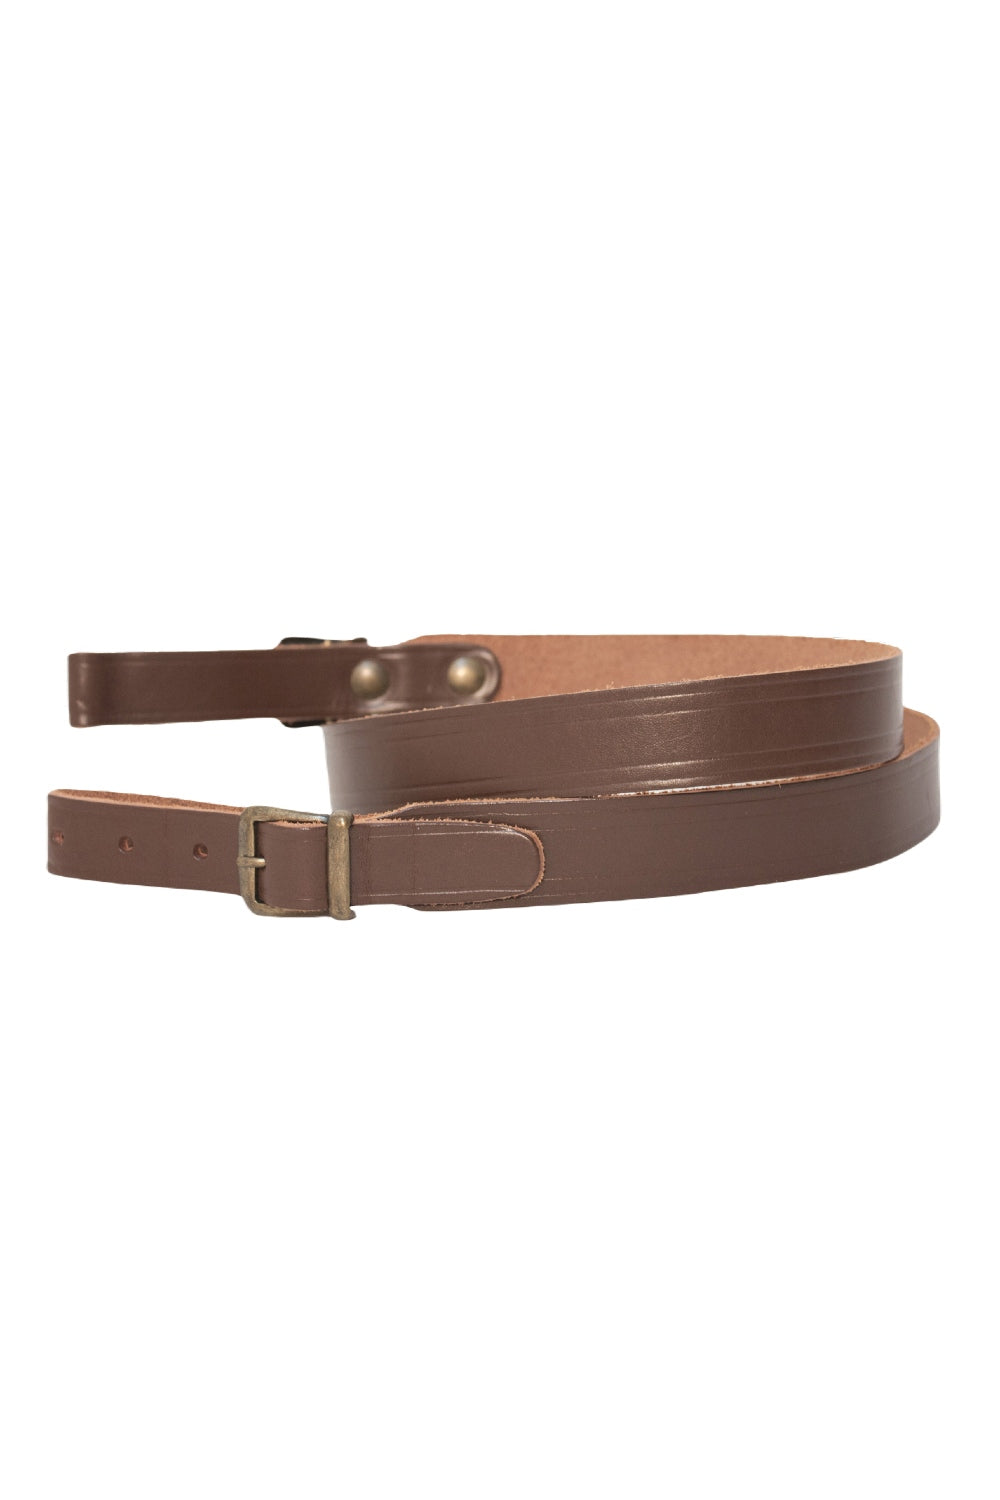 Basic Sling Brown Leather 